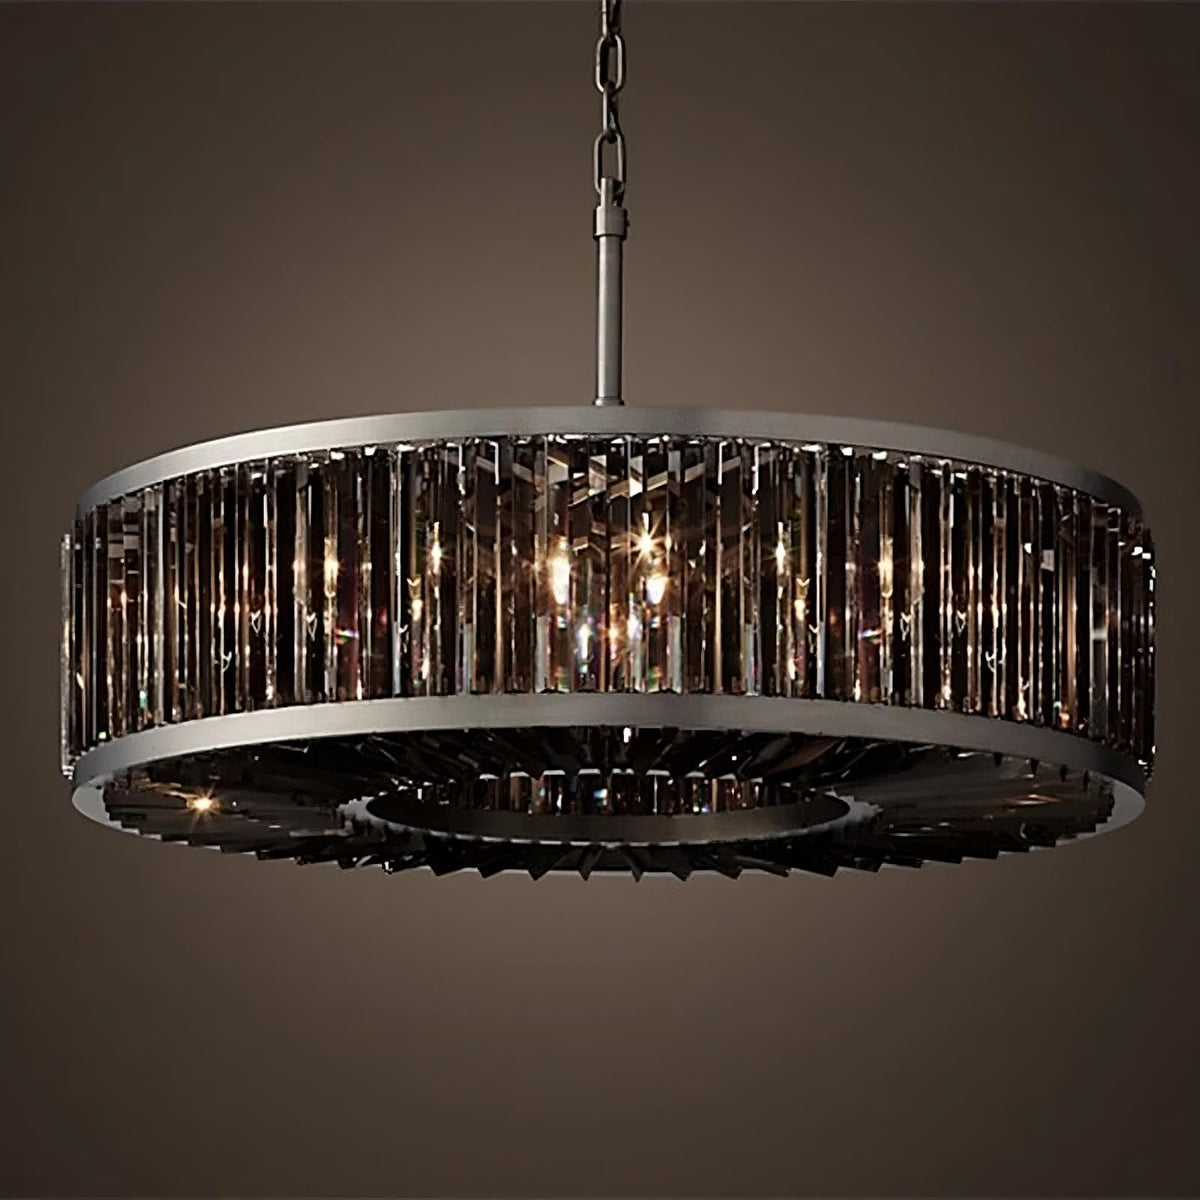 A modern, circular Gio Crystal Modern Chandelier with an industrial design hangs from a chain. The chandelier features a metal frame with vertical, rectangular glass panels surrounding the light bulbs, casting a warm, ambient glow. The background is dark, emphasizing the modern elegance of the chandelier by Morsale.com.